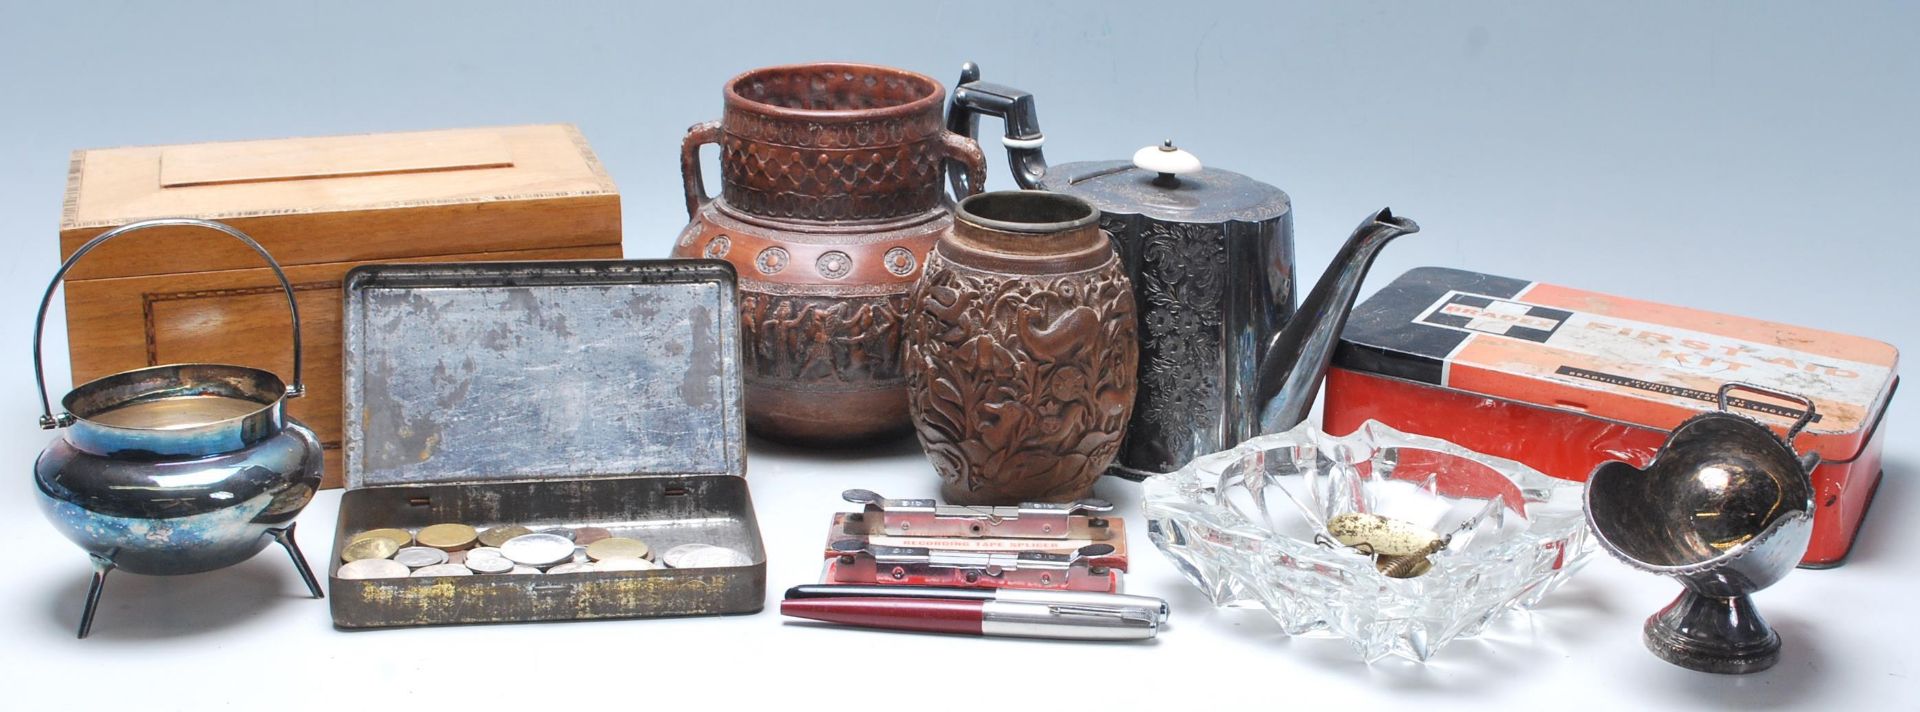 A collection of vintage curiosity items to include Parker pens, wooden carved brush pot, fire aid